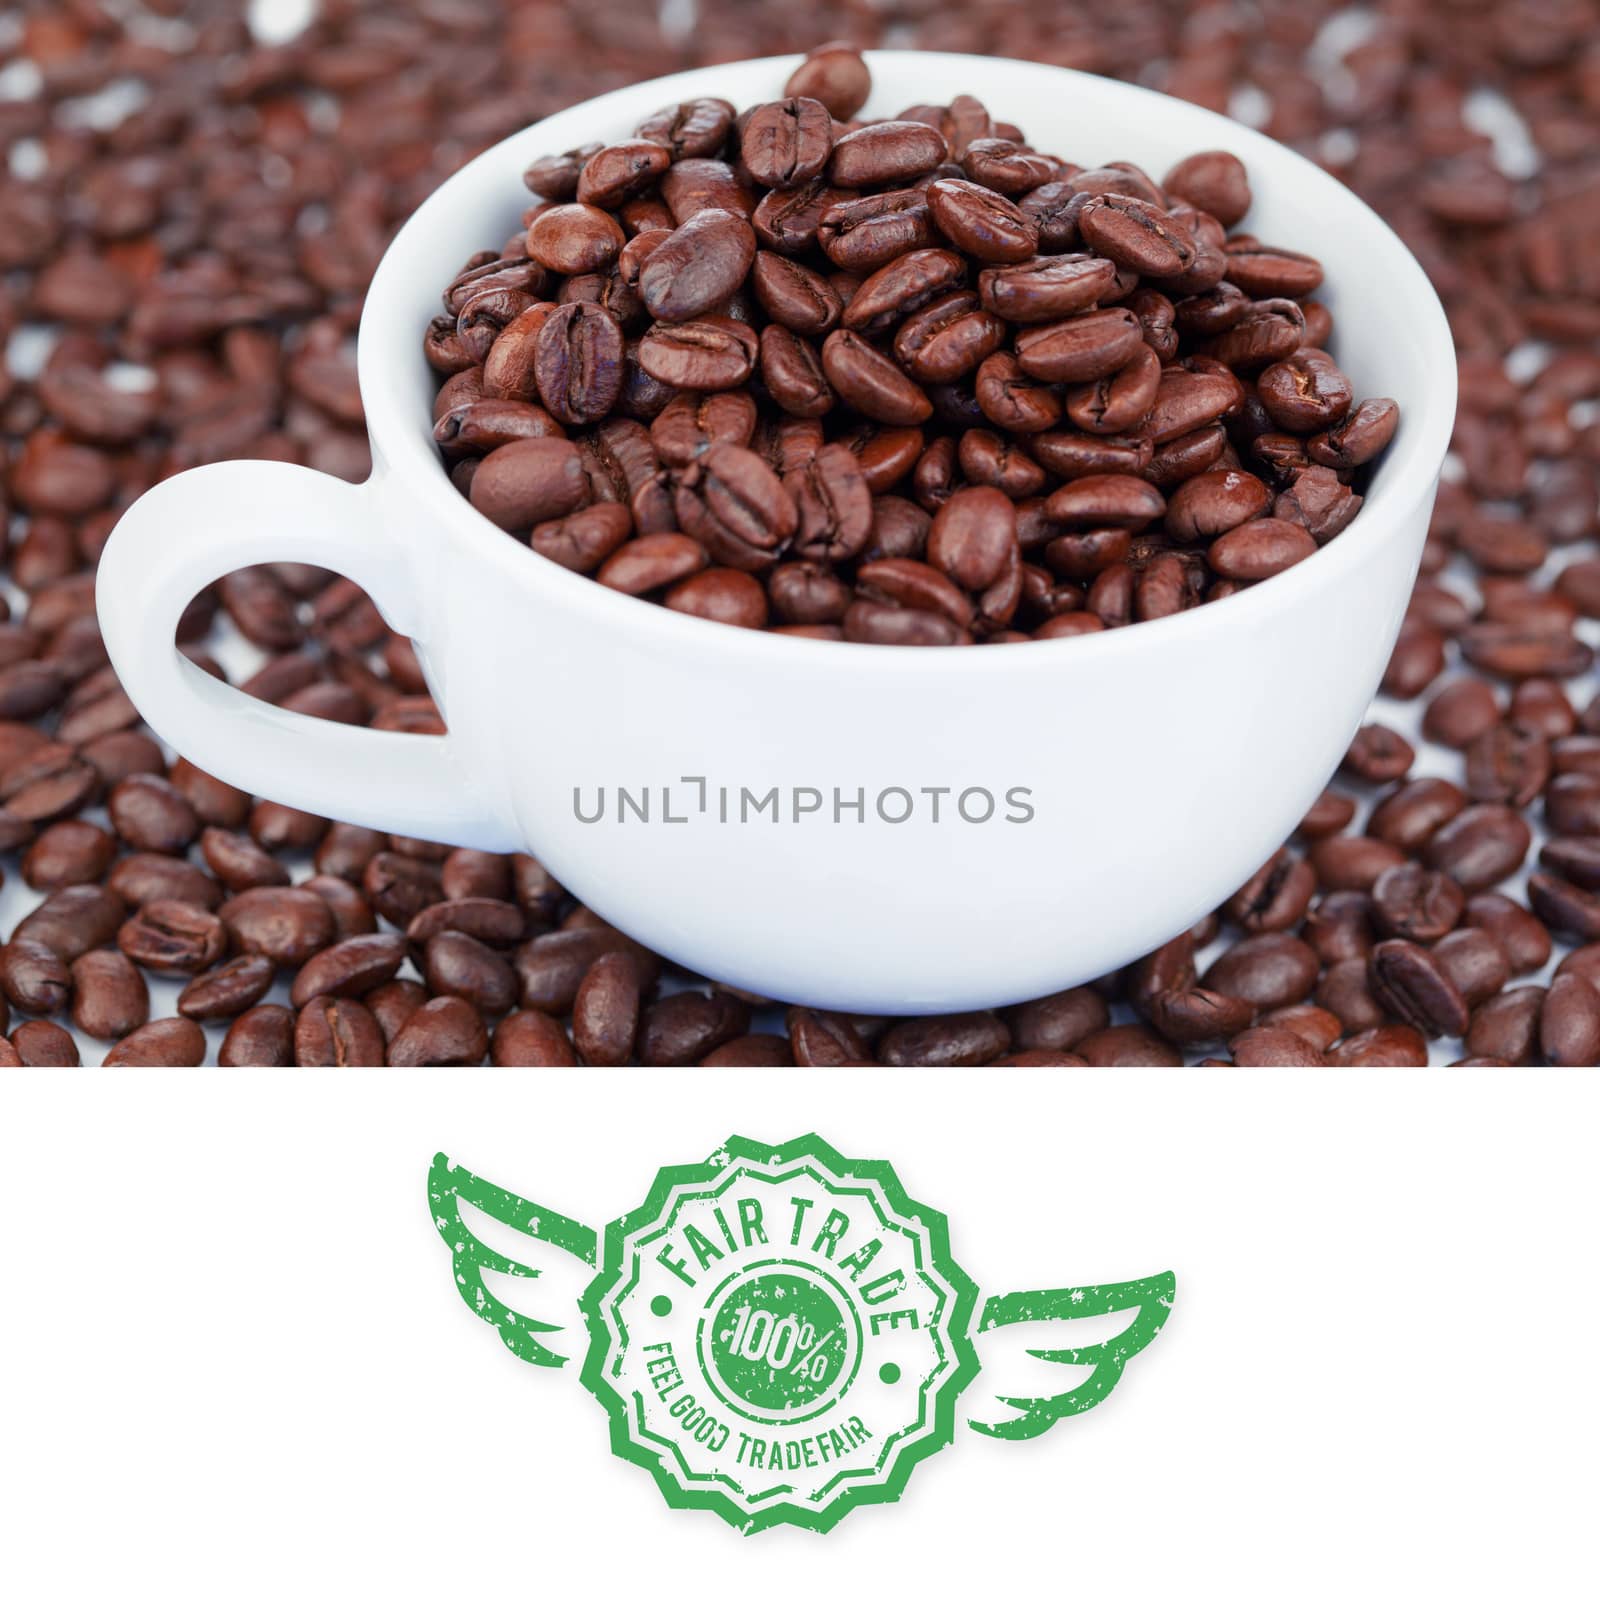 Fair Trade graphic against small white cup of coffee beans